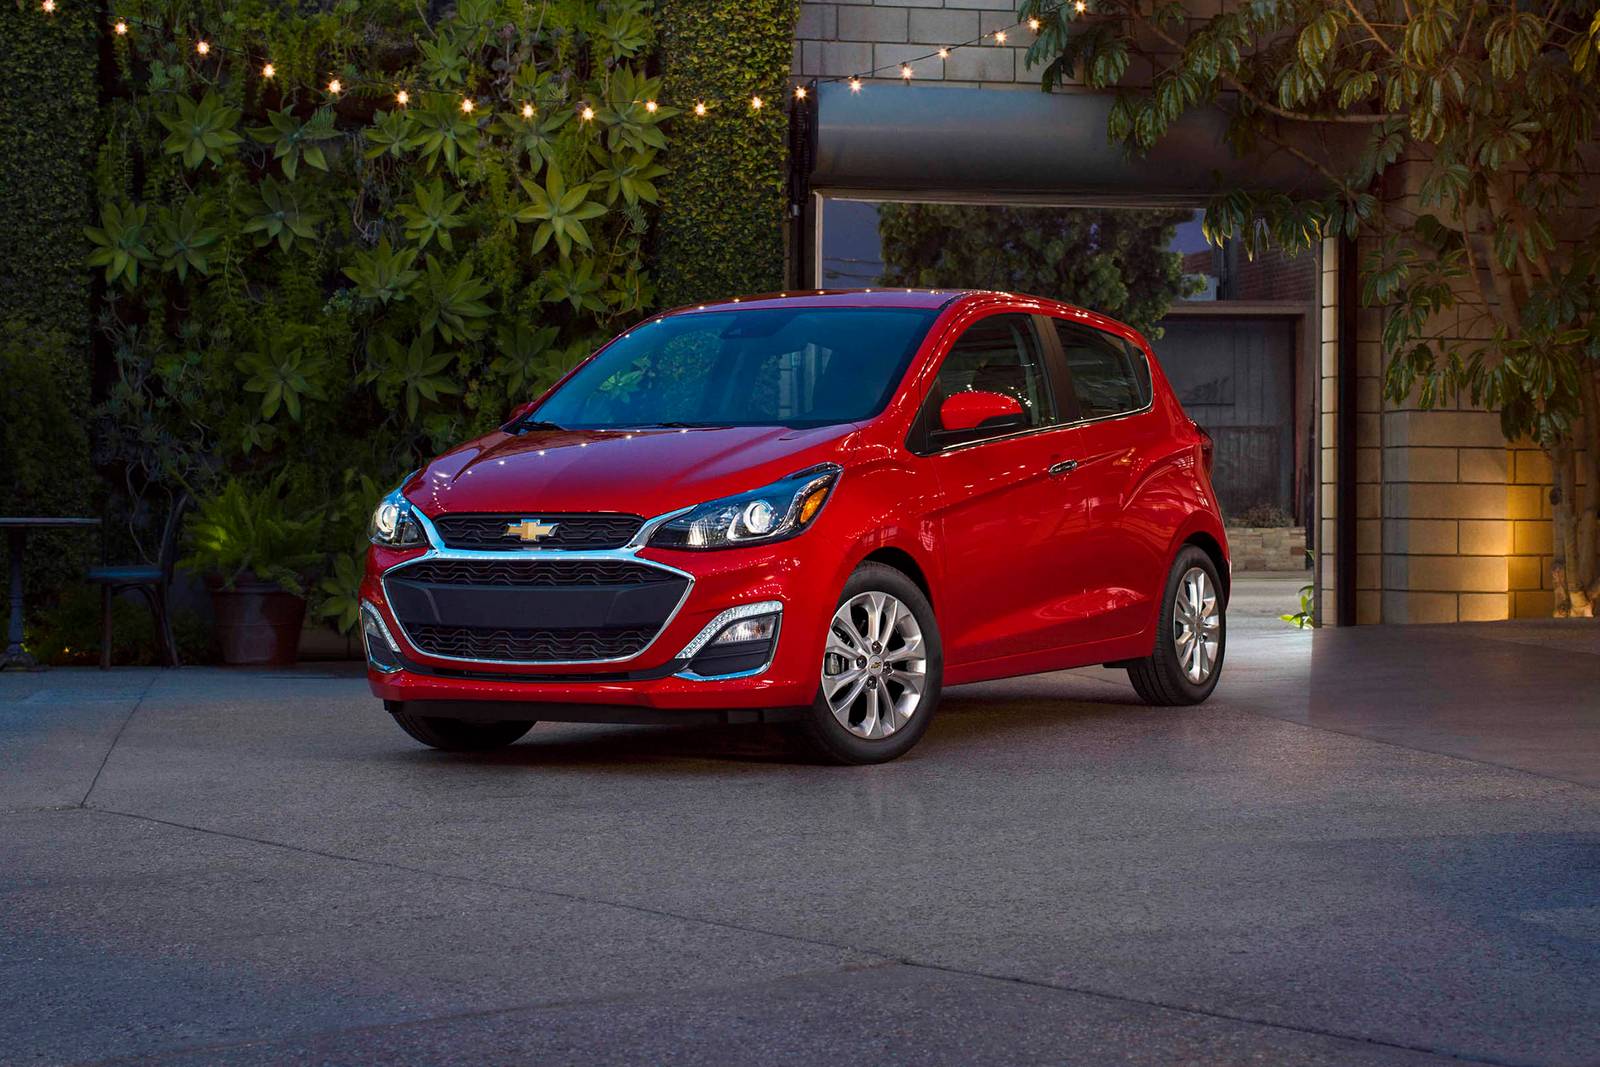 A 3/4 front view of a red Chevrolet Spark.